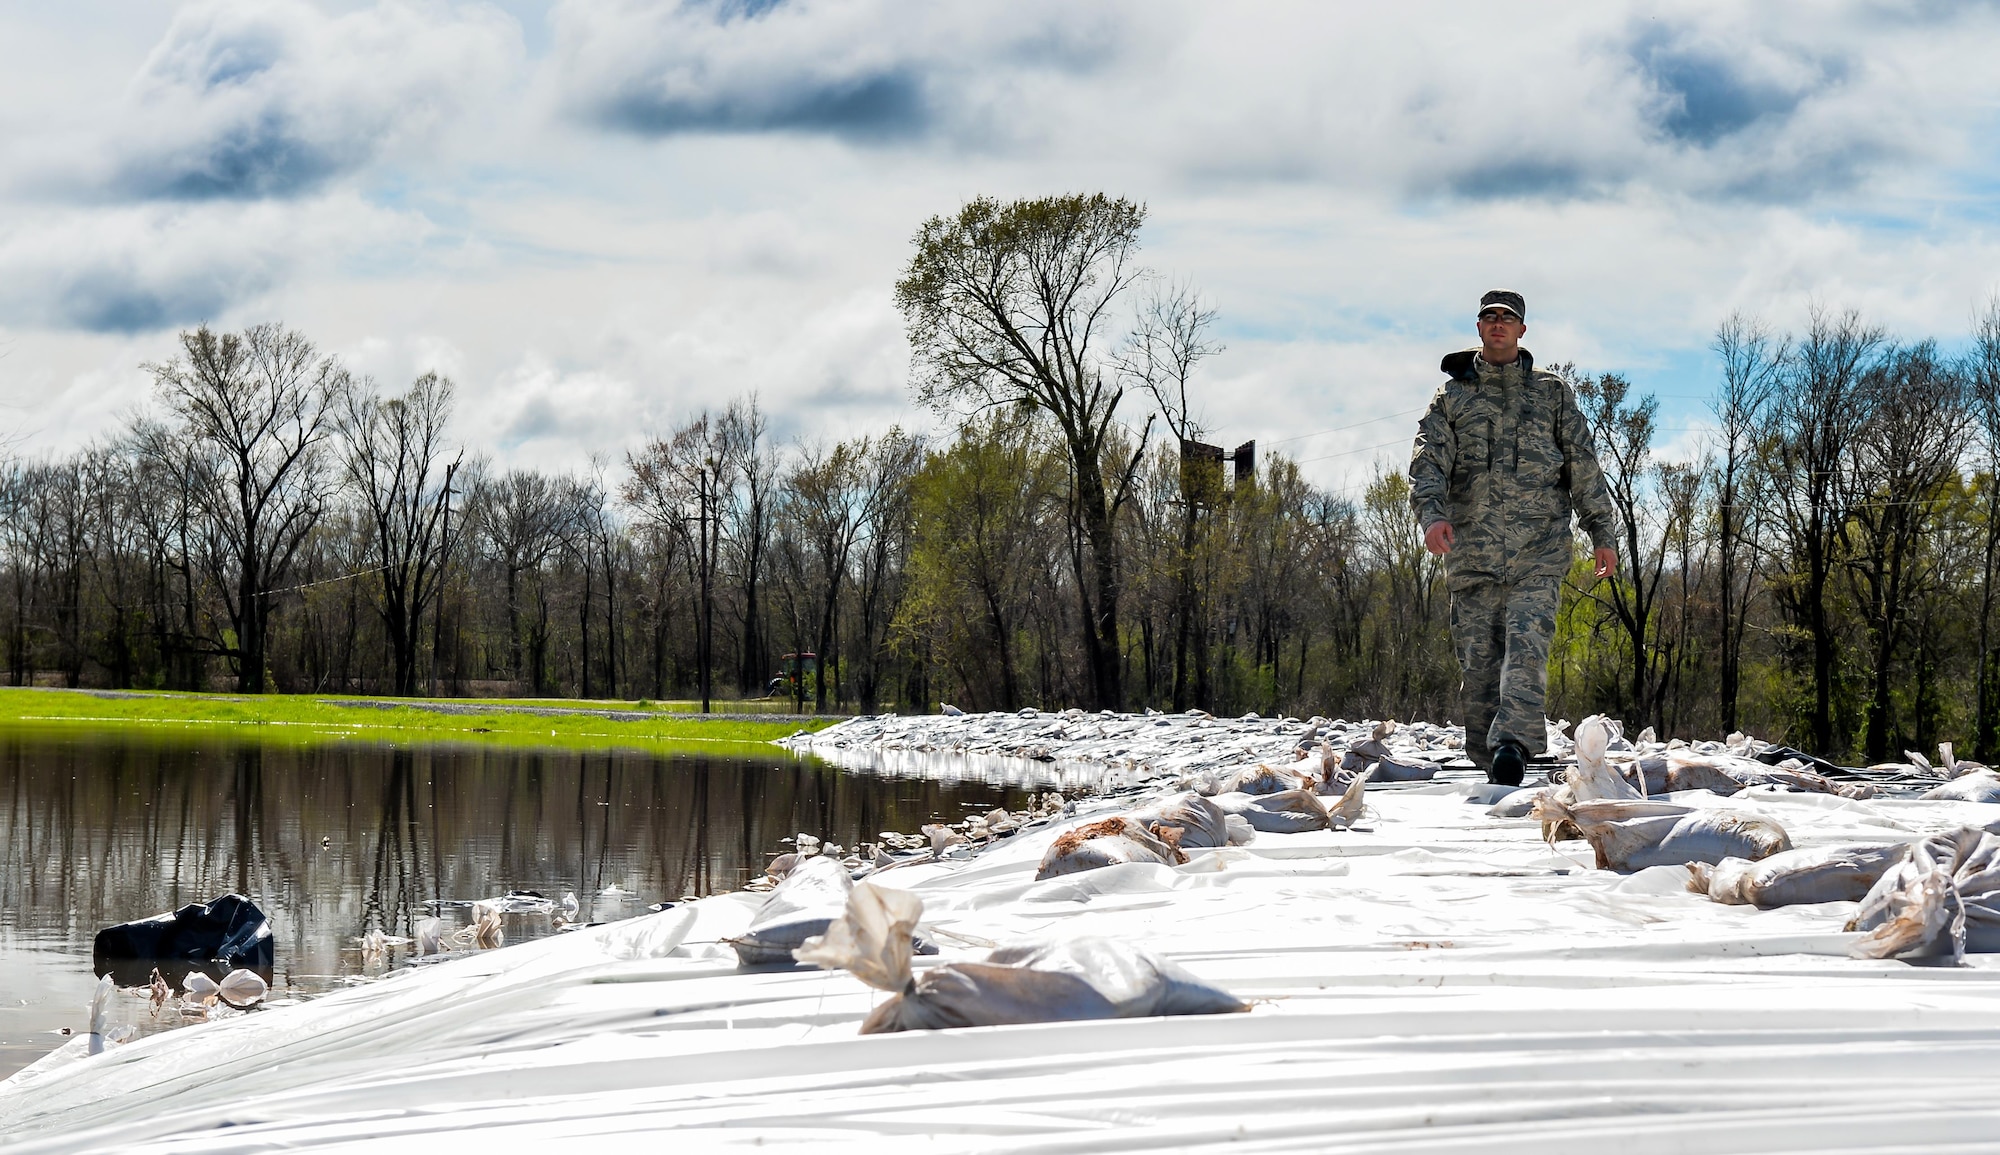 An Airman with the 2nd Logistic Readiness Squadron surveys a newly covered portion of the levee in Bossier City, La. March 10, 2016.  The plastic and sandbag barrier protected the Red Chute Bayou levee from potential corrosion caused by the overflowing river. (U.S. Air Force photo/Senior Airman Mozer O. Da Cunha)